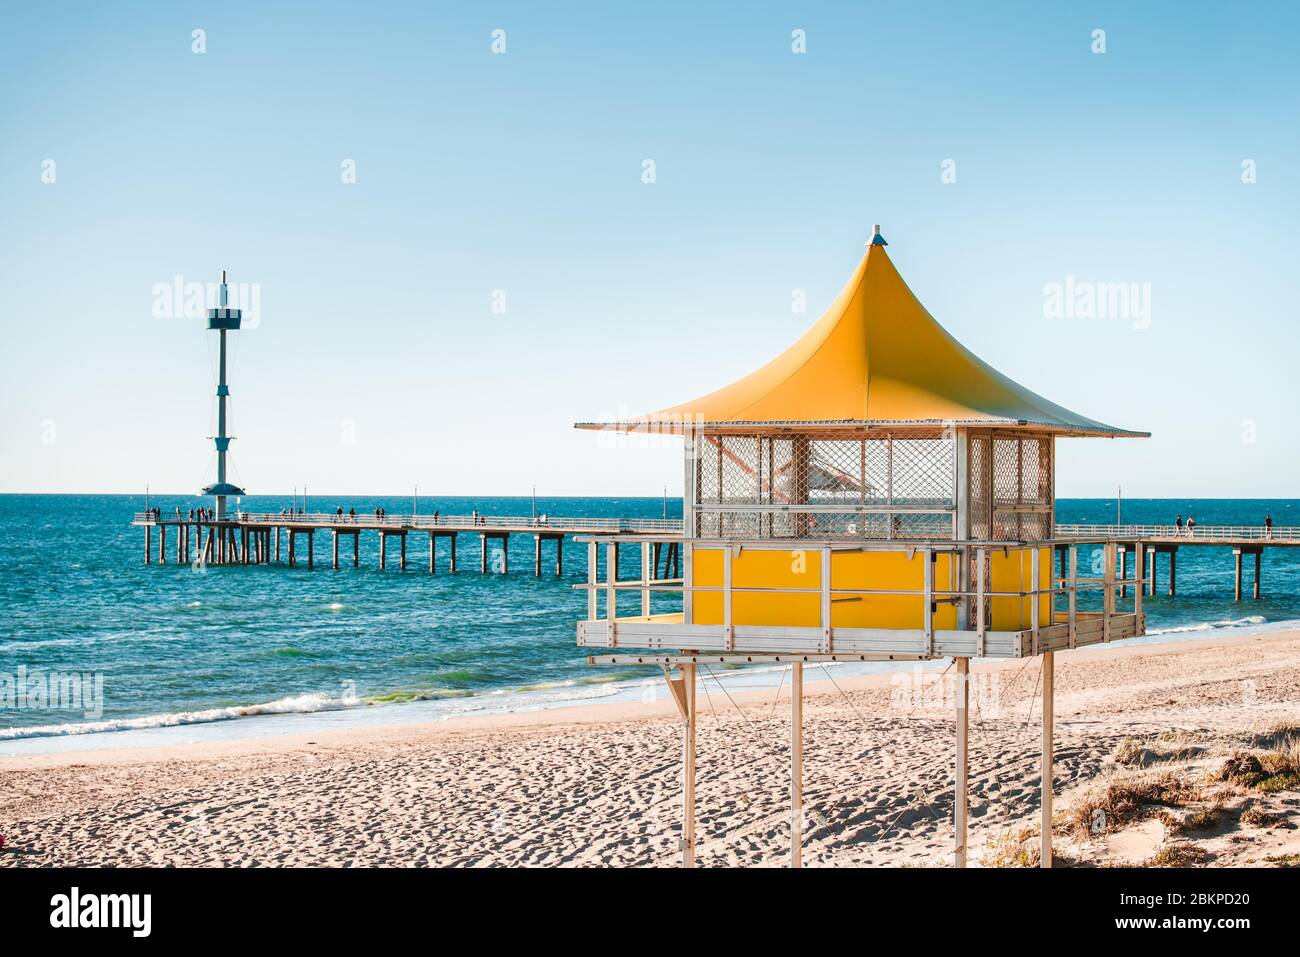 Brighton surf life saving tower with people walking along the jetty on the background, South Australia Stock Photo